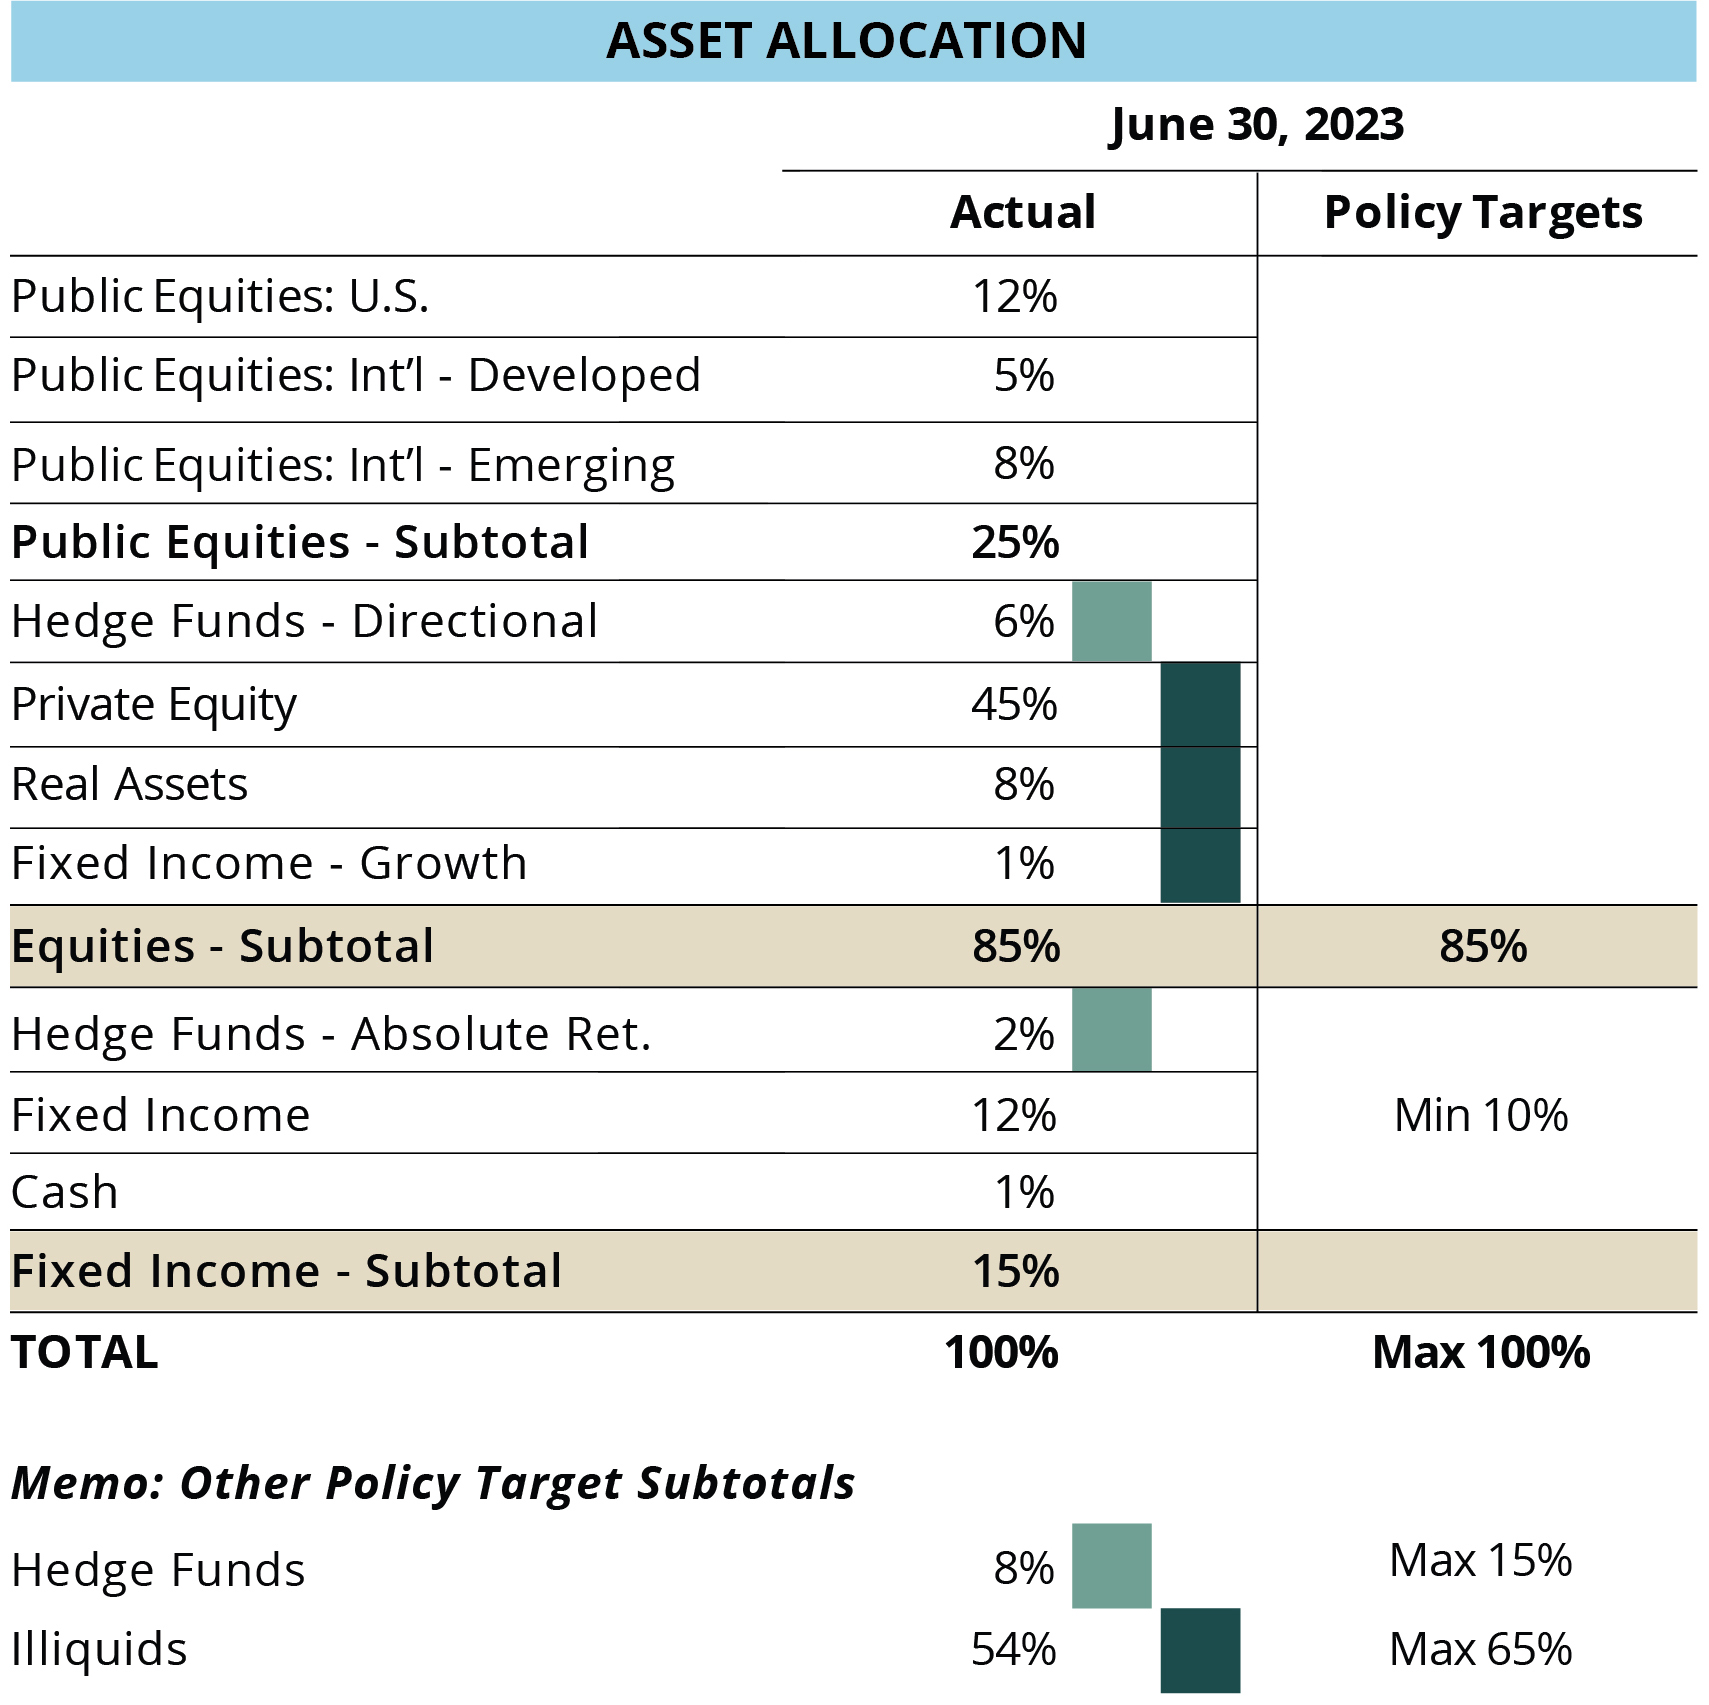 Figure 1: Asset Allocation – Actual Allocations and Policy Targets